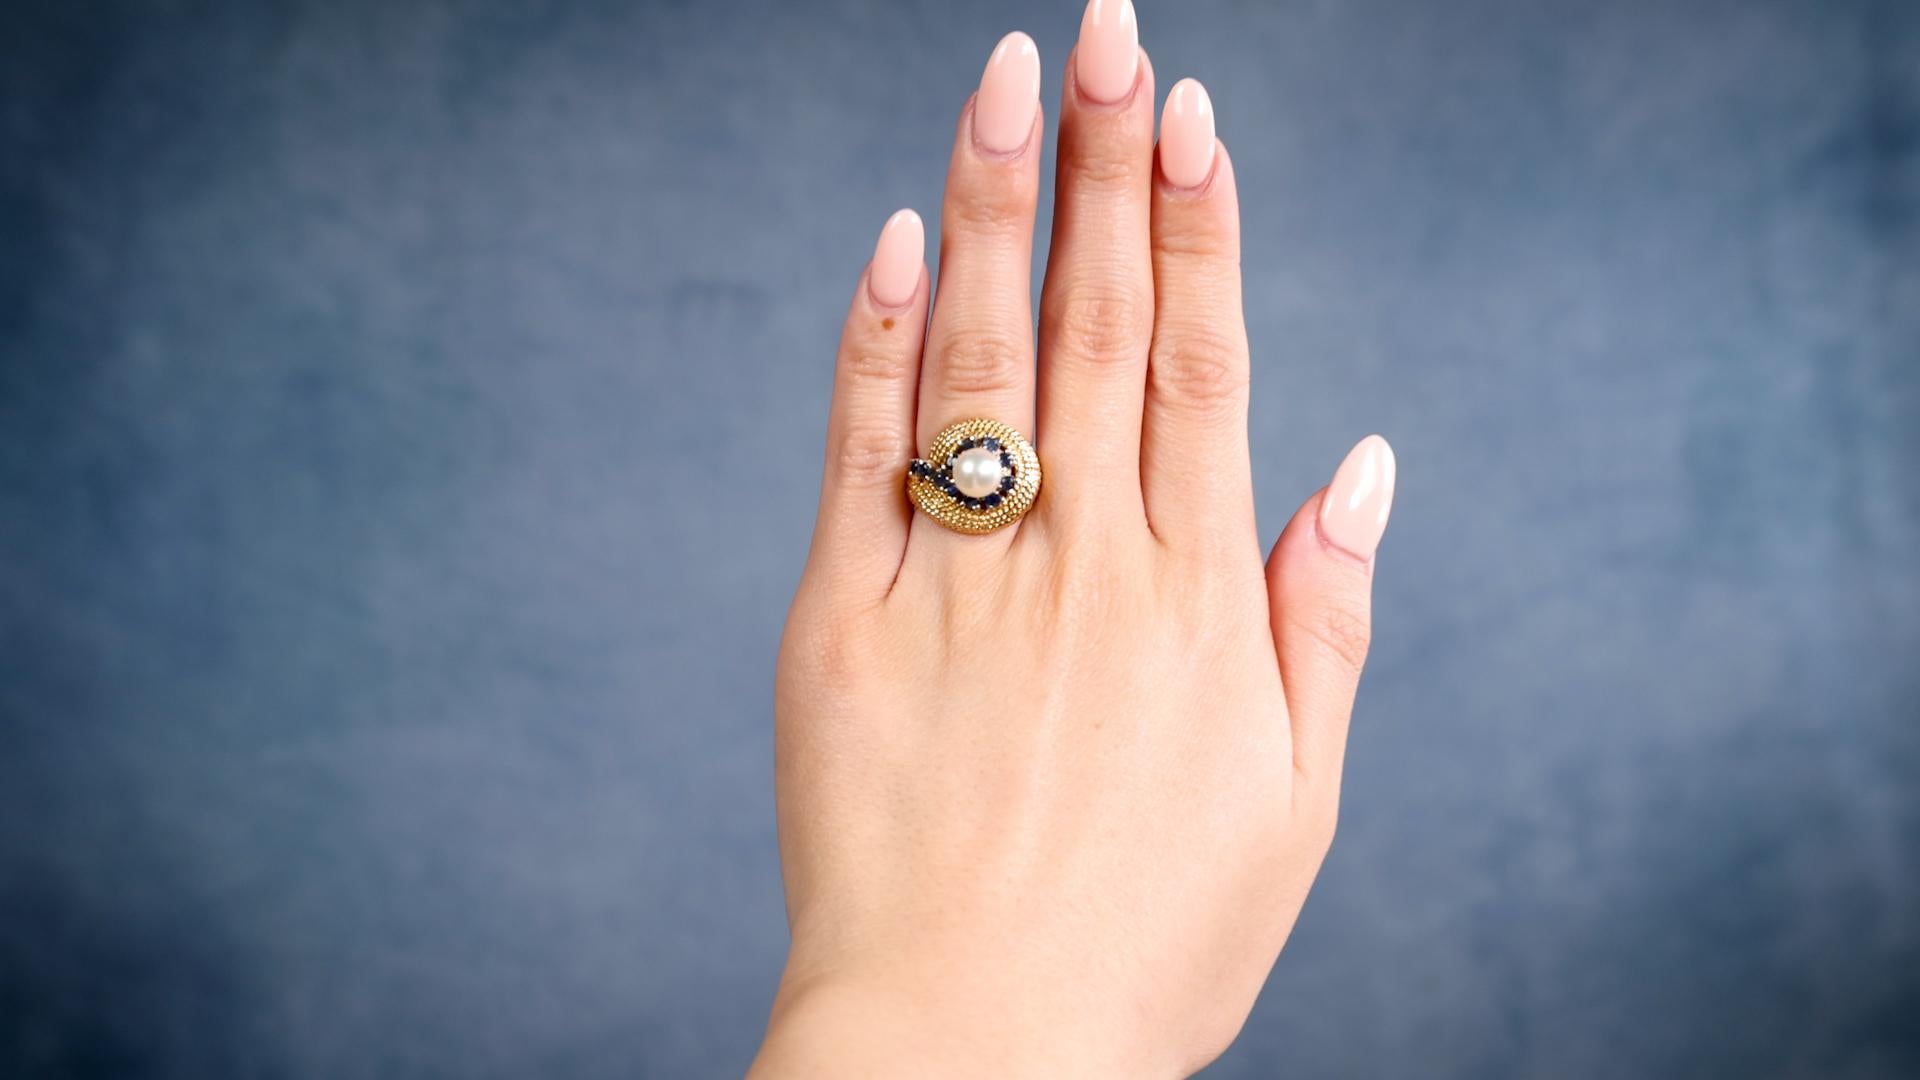 One Mid-Century Pearl Sapphire 14k Yellow Gold Ring. Featuring one cream pearl with rosé overtone measuring approximately 6.90 millimeters. Accented by 11 round sapphires with a total weight of approximately 0.25 carat. Crafted in 14 karat yellow